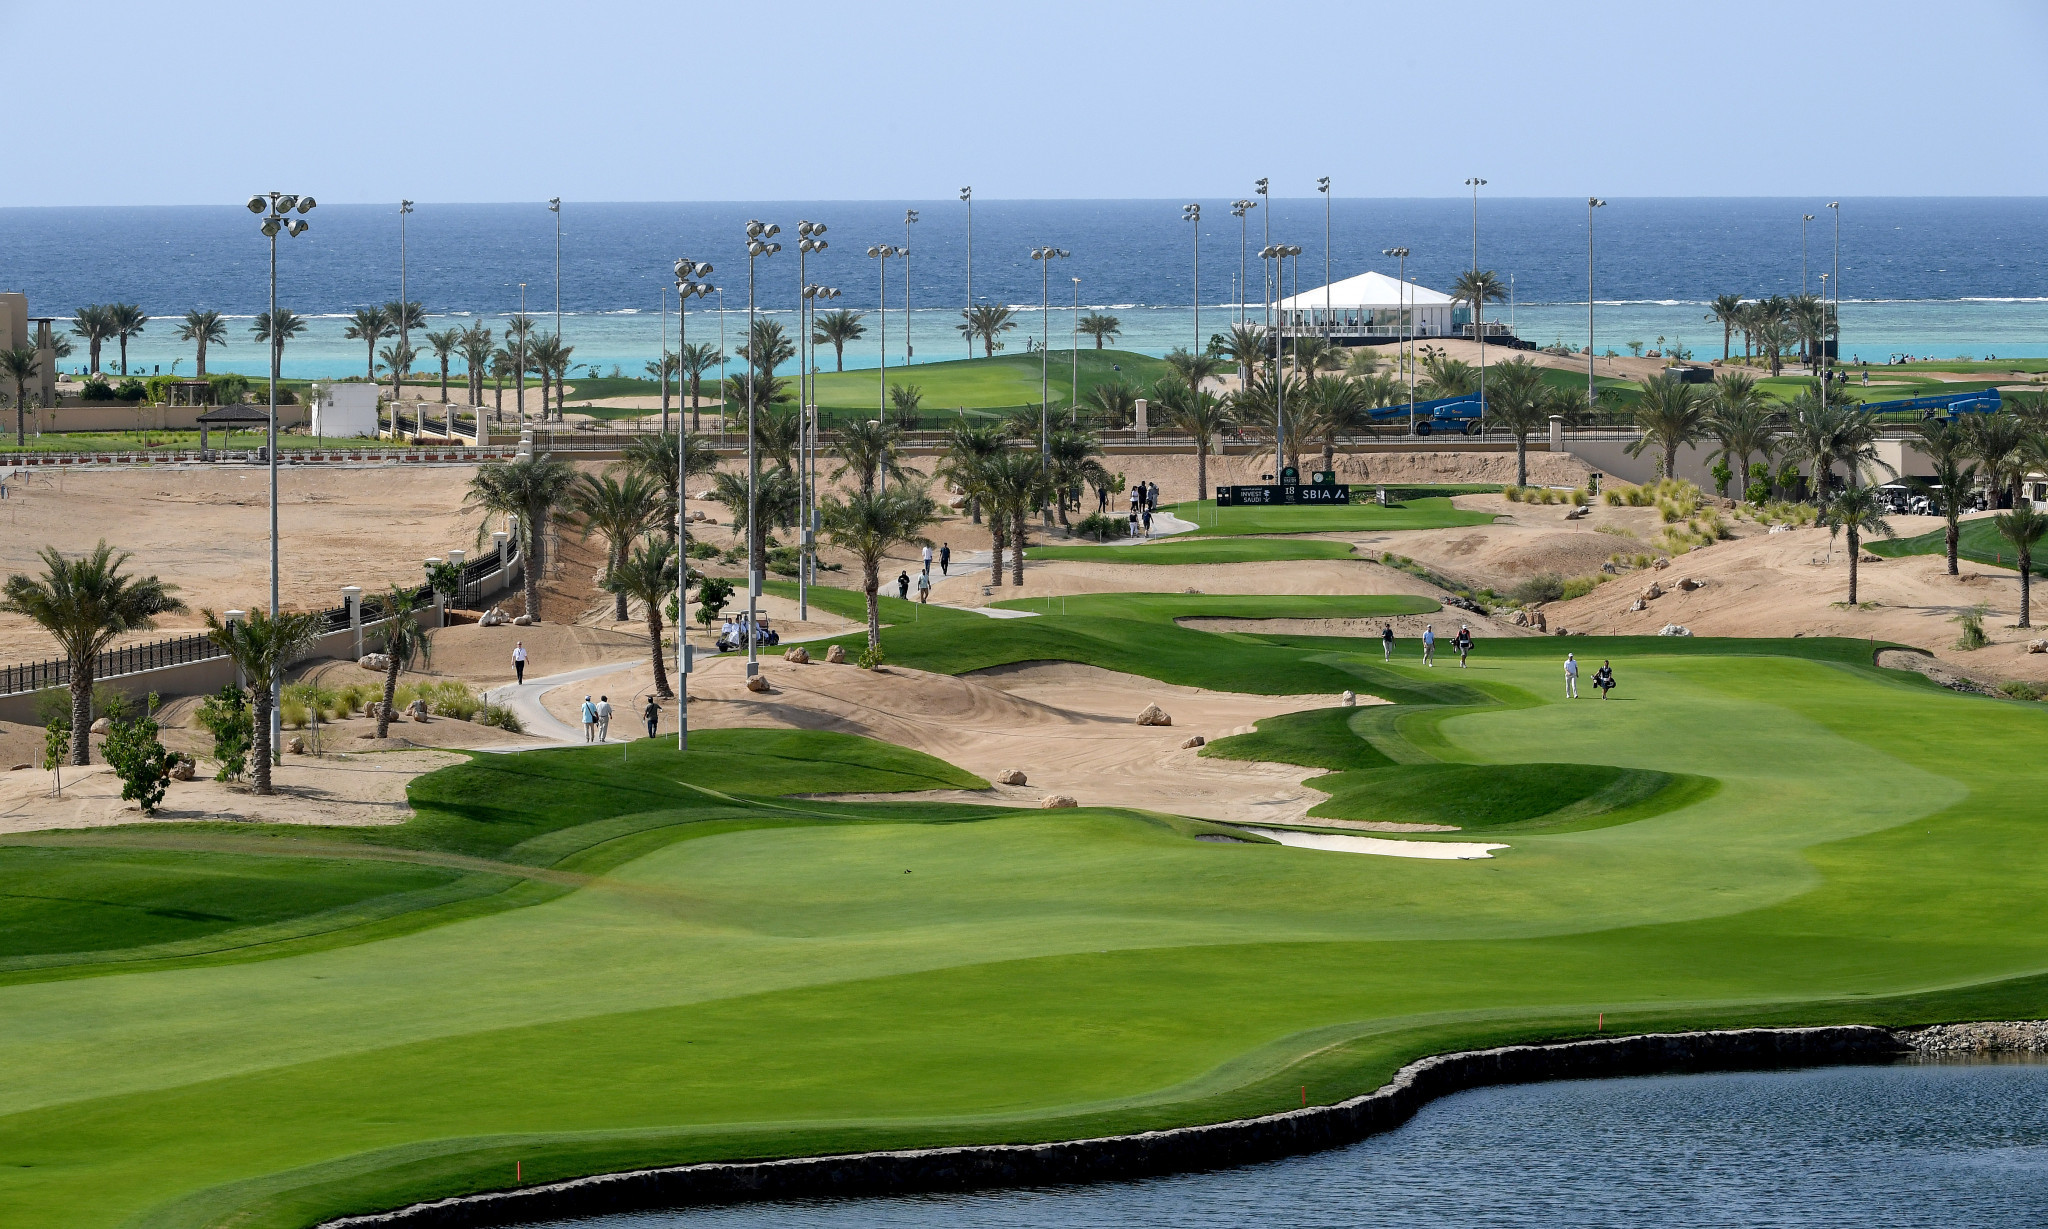 The Royal Greens Golf Club near the Red Sea is scheduled to host the competitions ©Getty Images